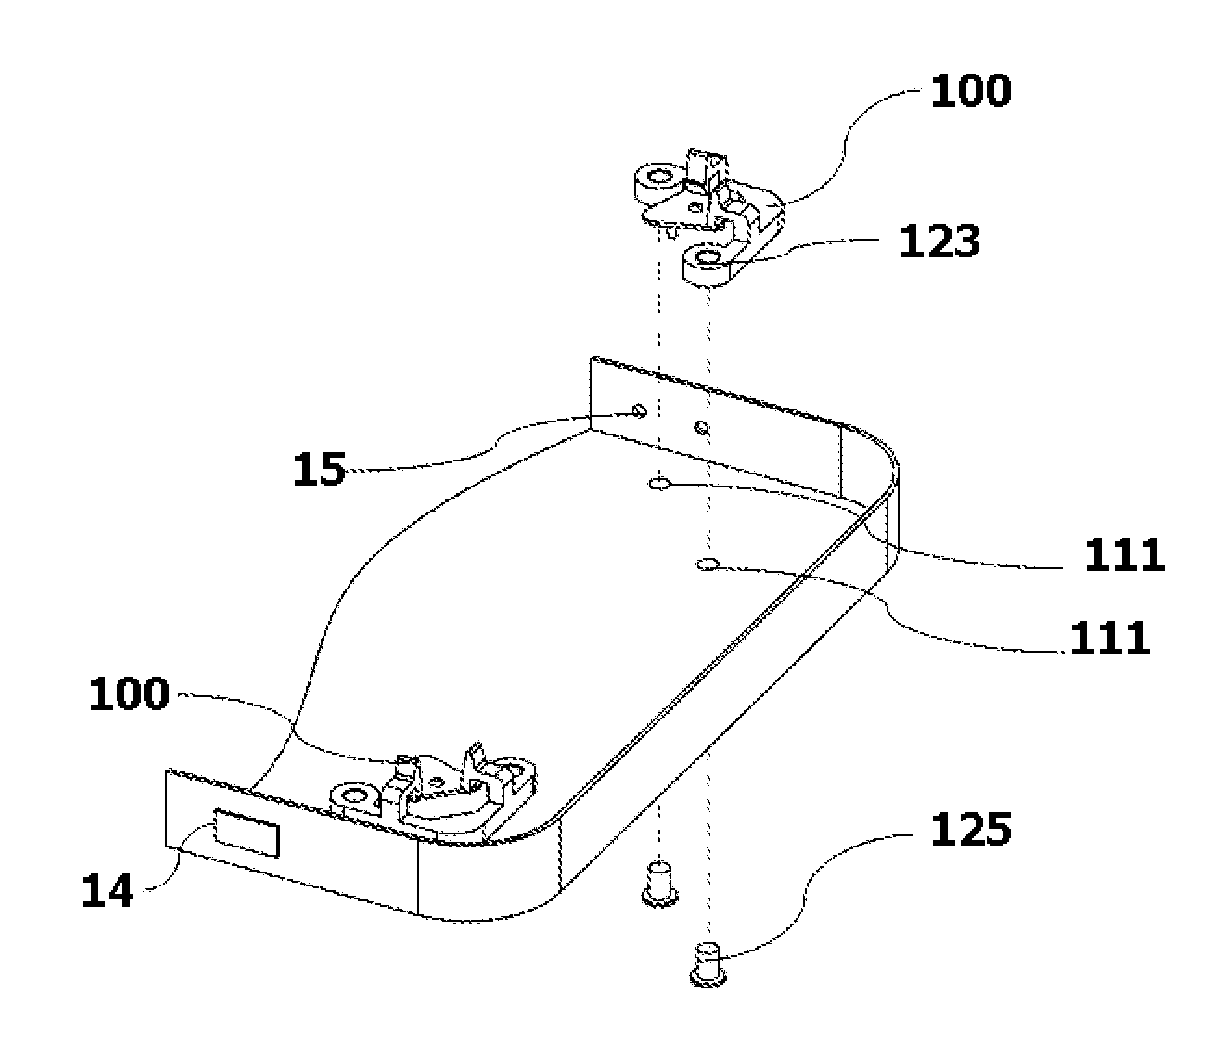 Reticle POD and supporting components therebetween